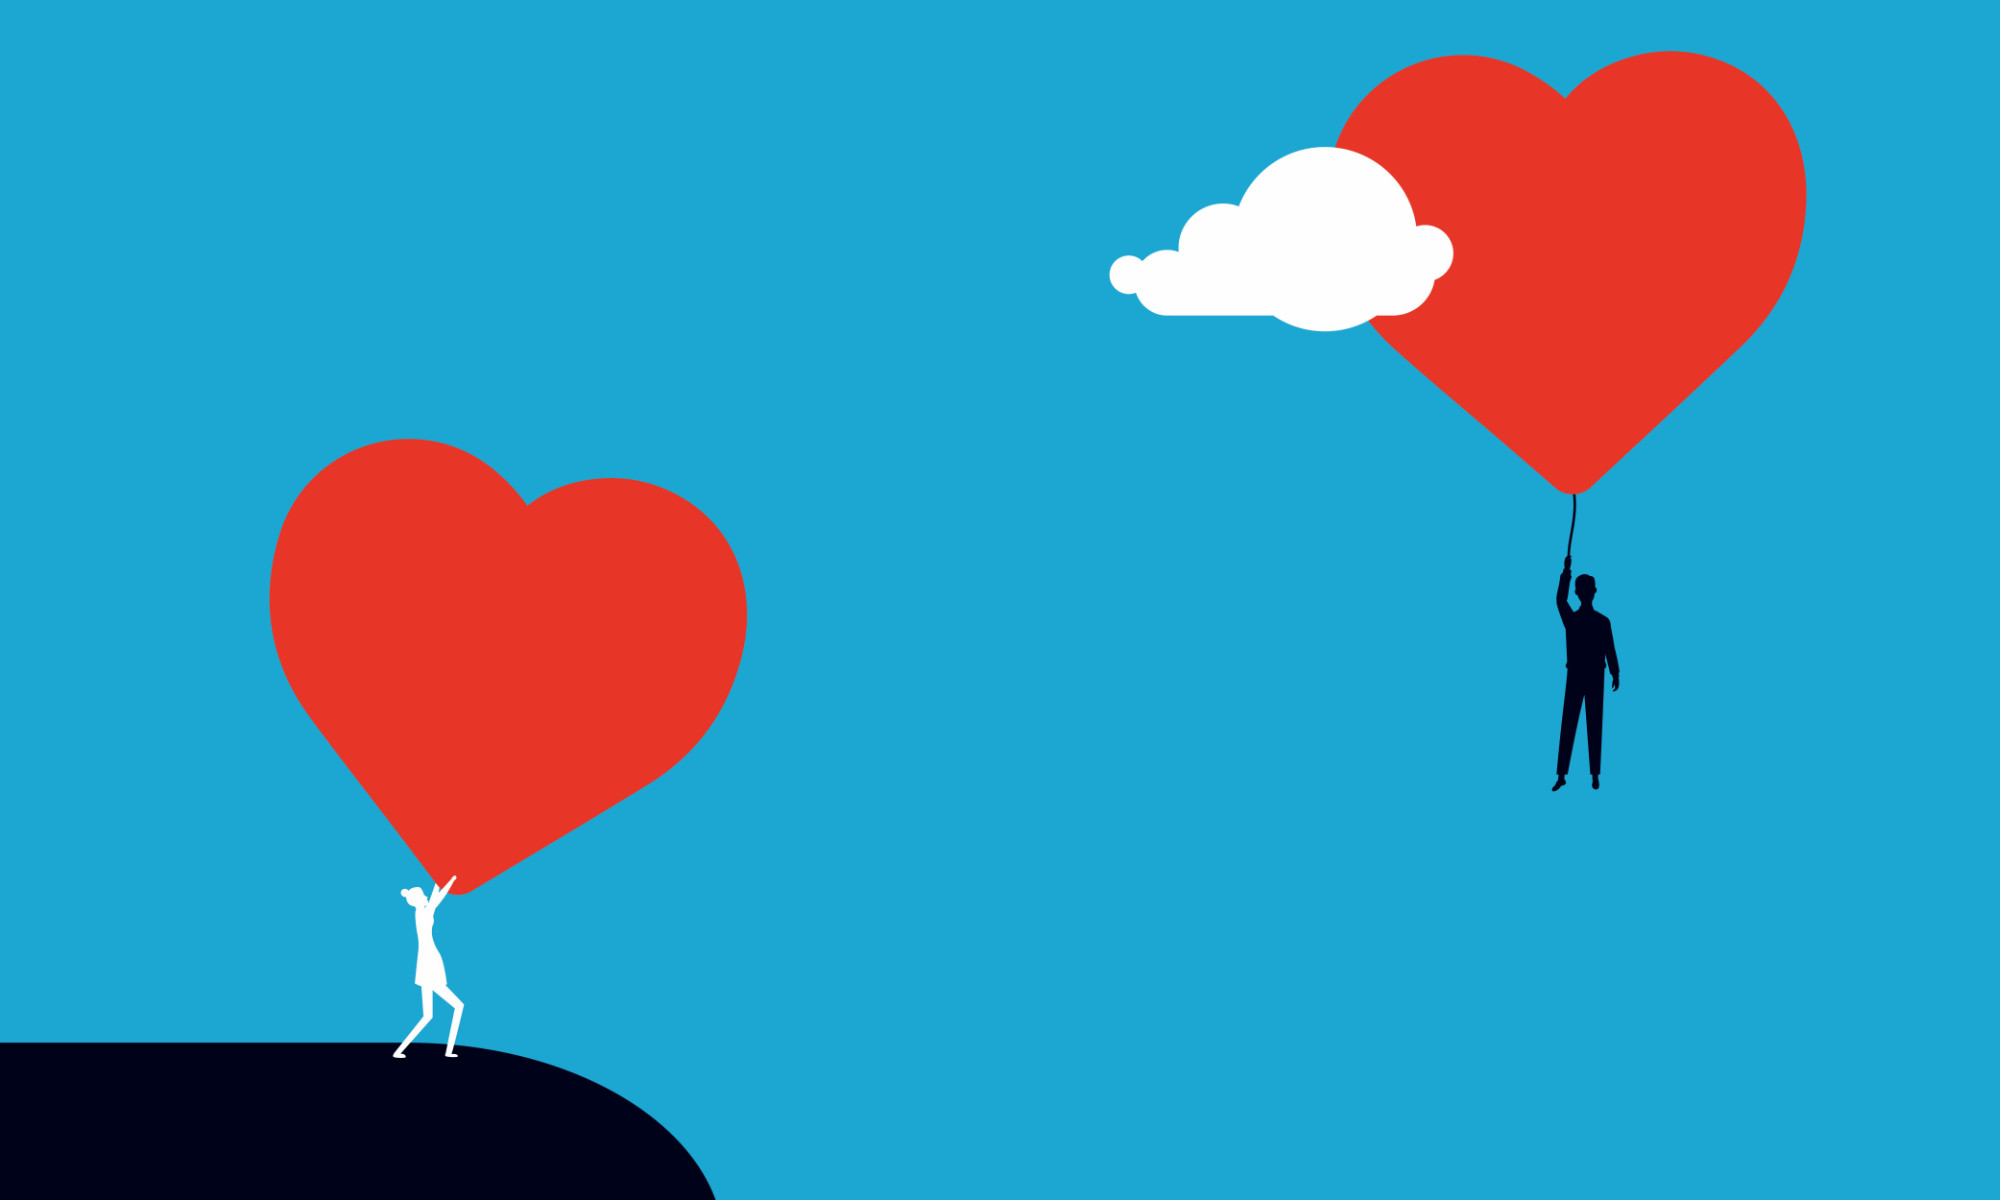 Illustration of finding love and online dating showing a person's outline on the ground holding a heart, while another person's outline floats away with a heart balloon.